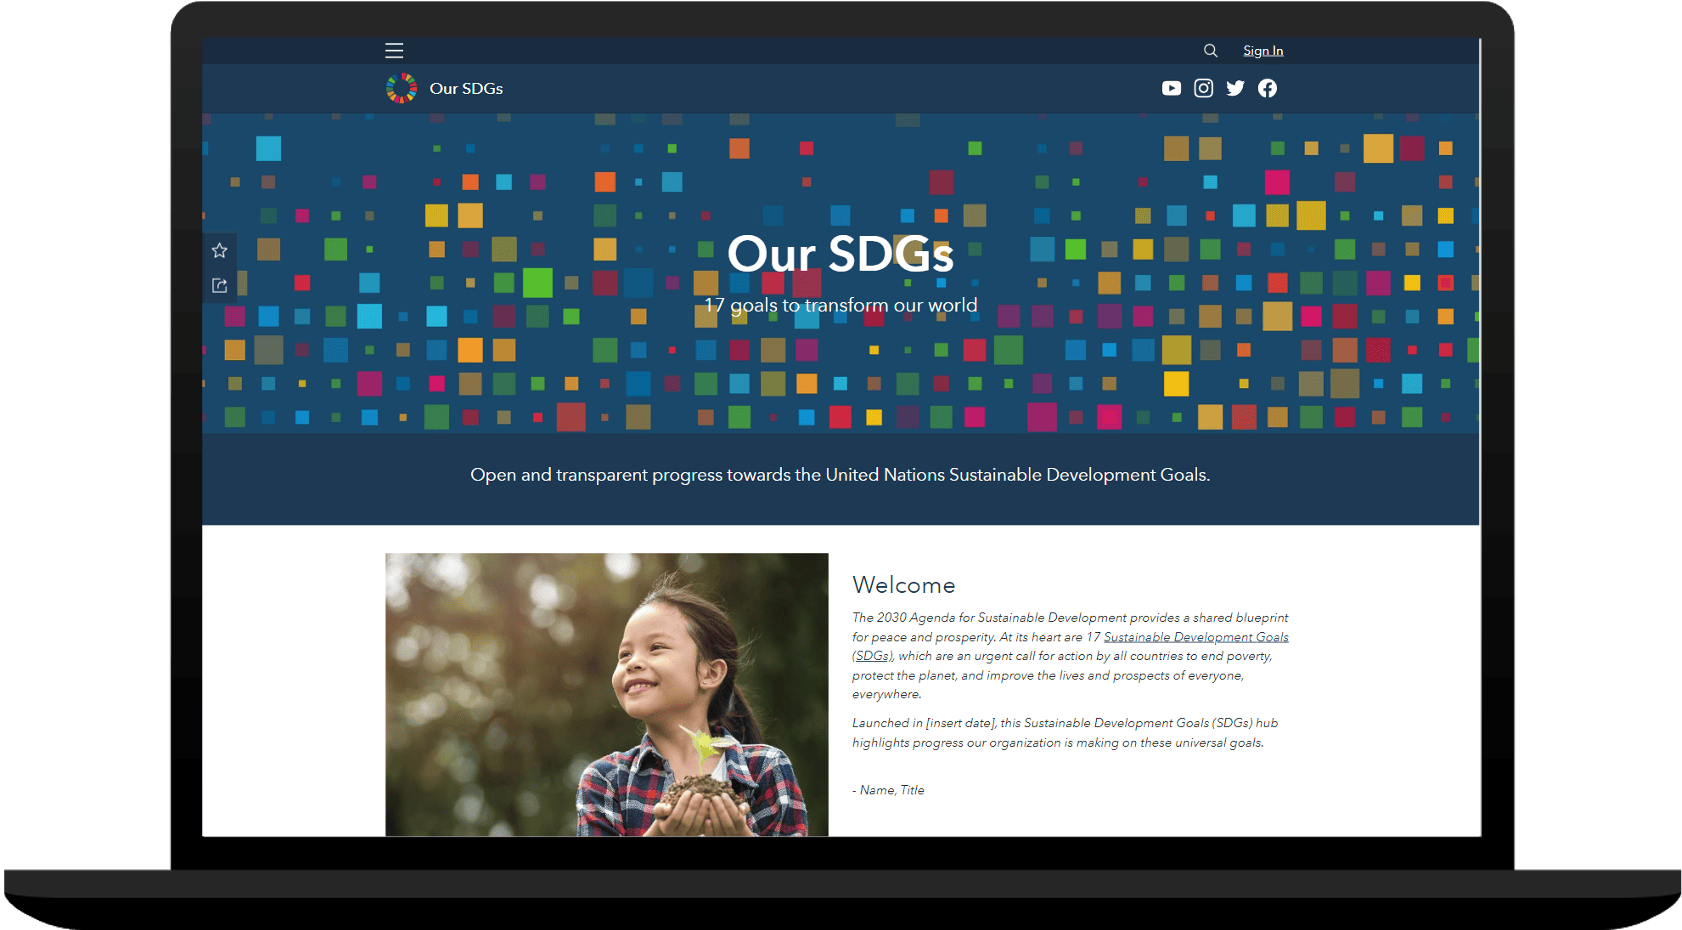 Browse a site designed to share progress made on Sustainable Development Goals.